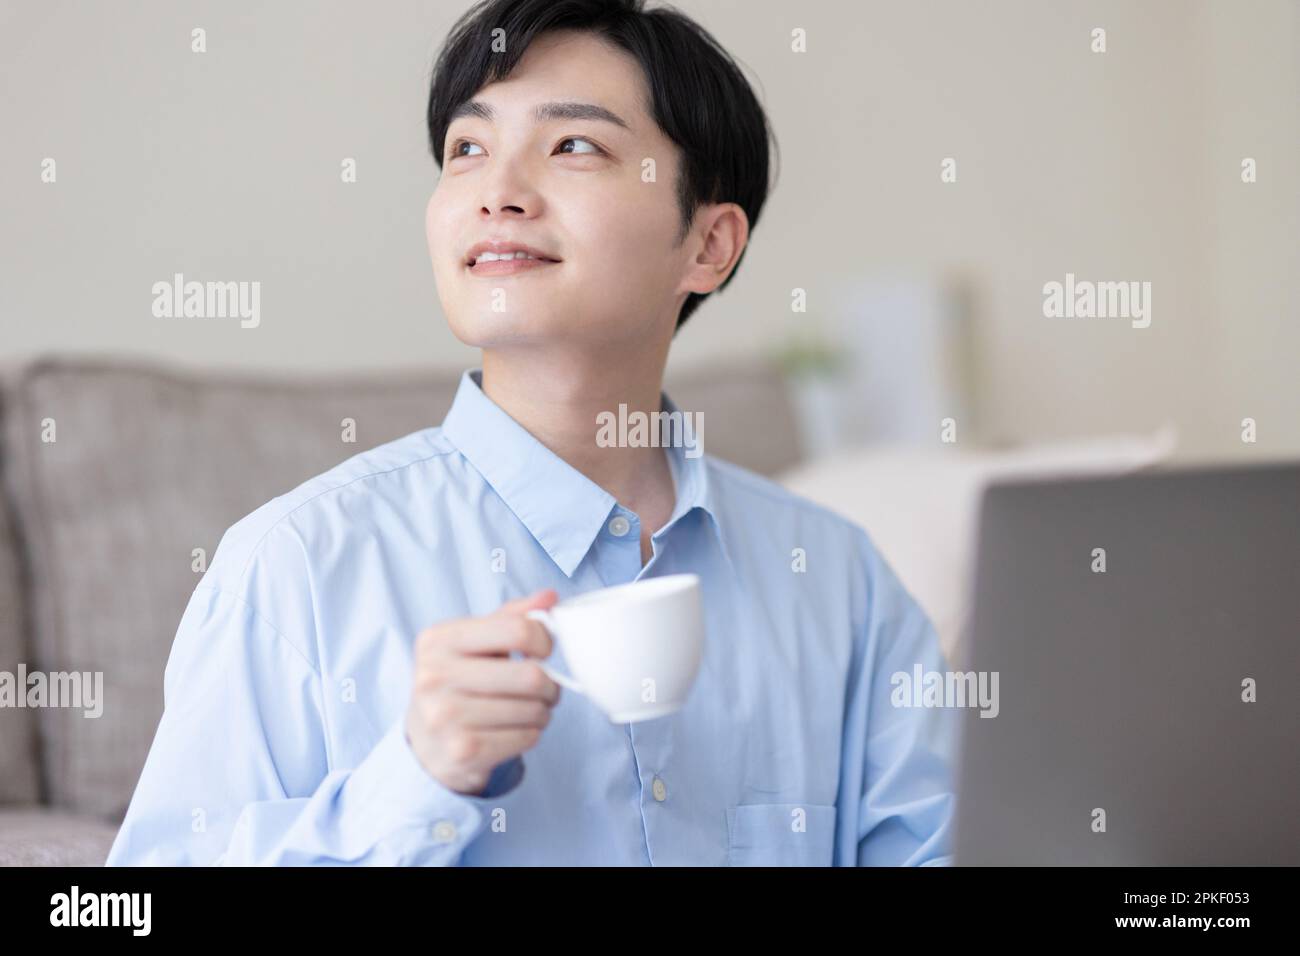 Man holding a cup Stock Photo